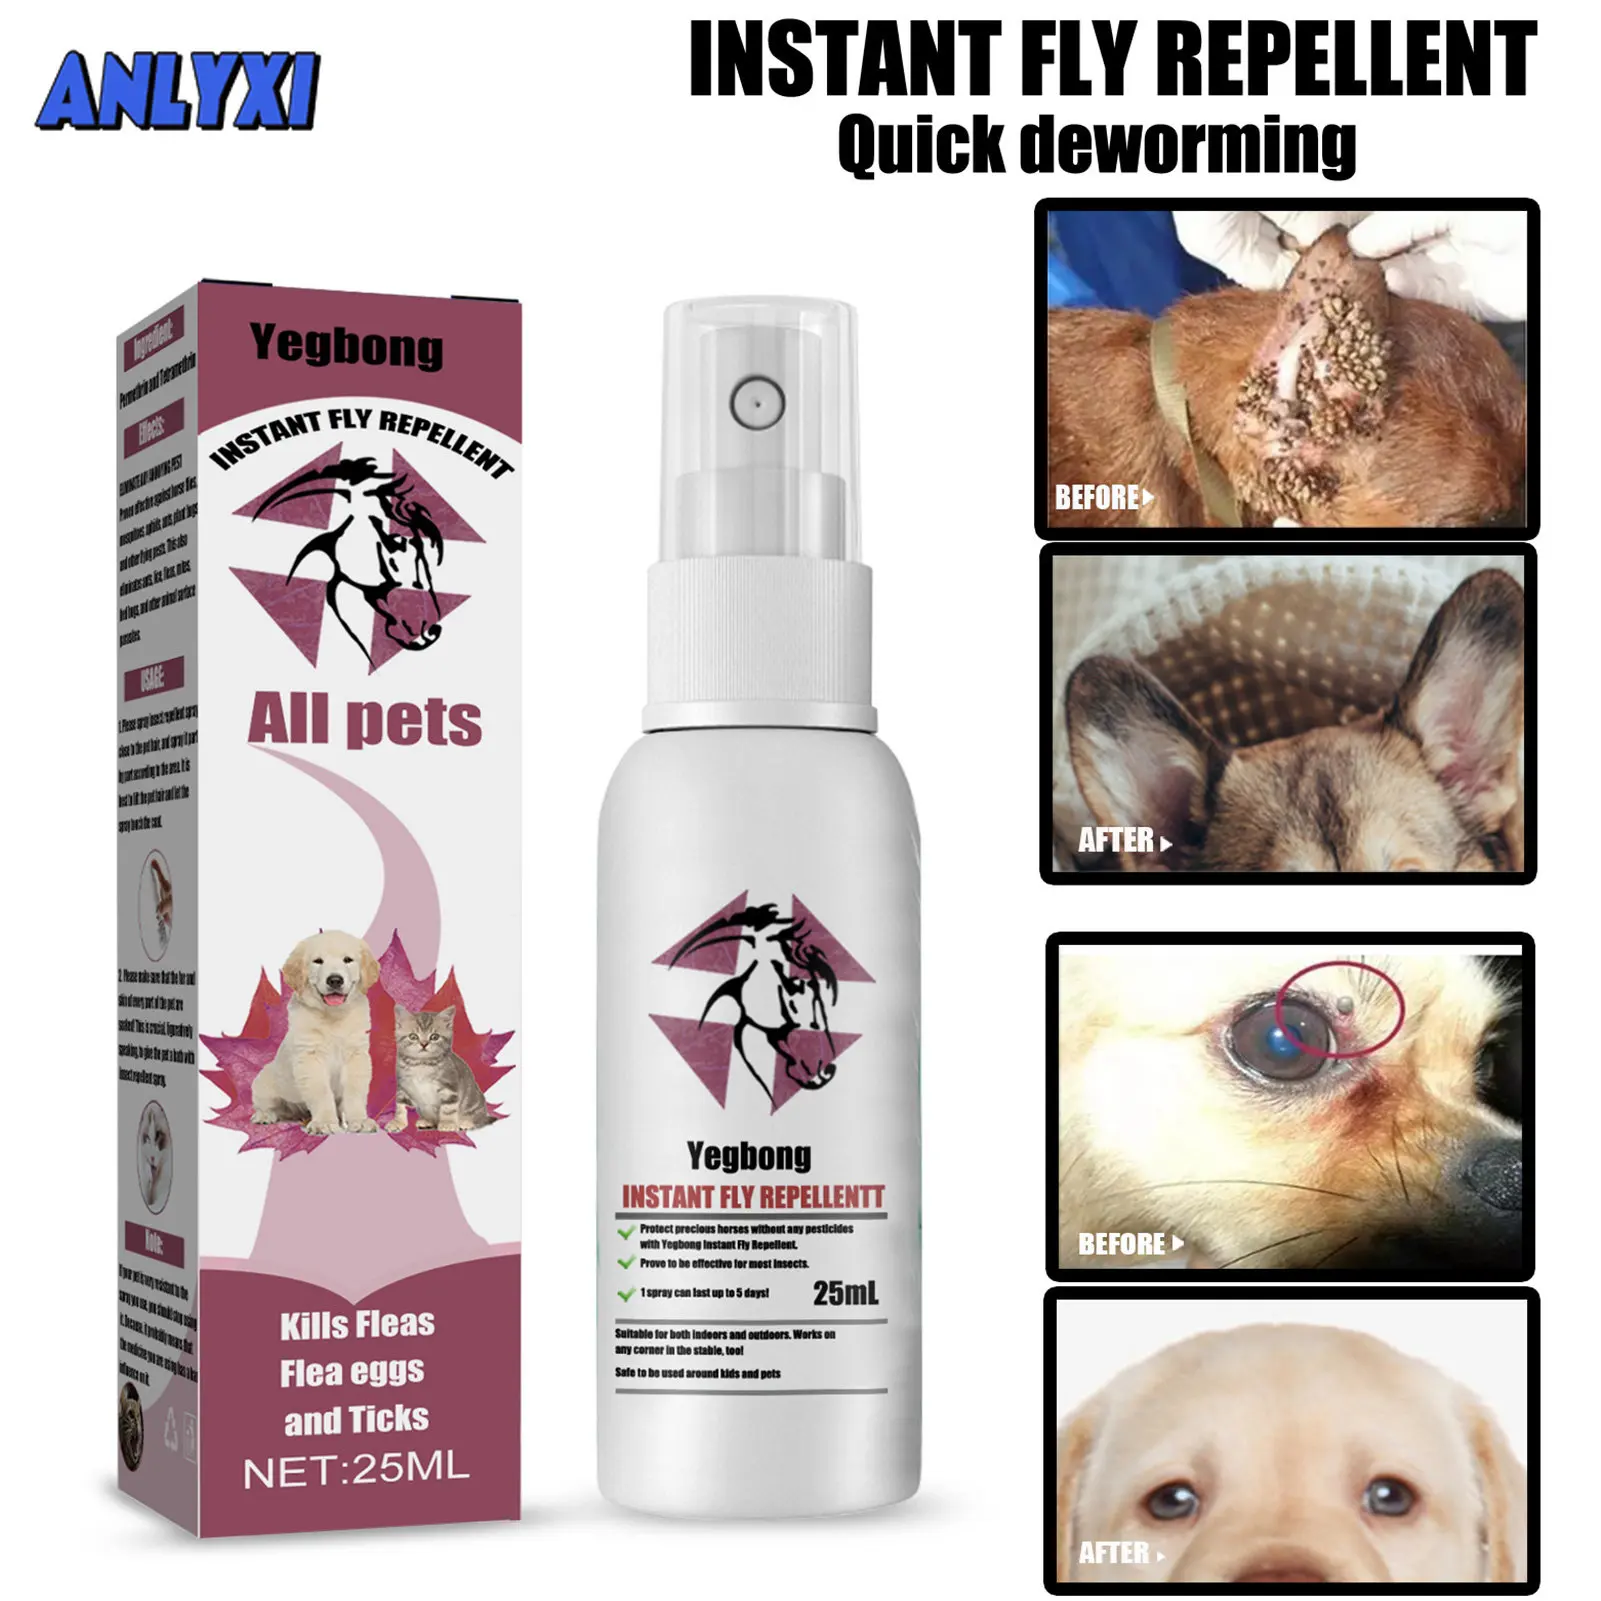 Pet Fur Spray Fleas Tick And Mosquitoes Spray For Dogs Cats And Home Fleas - $14.61